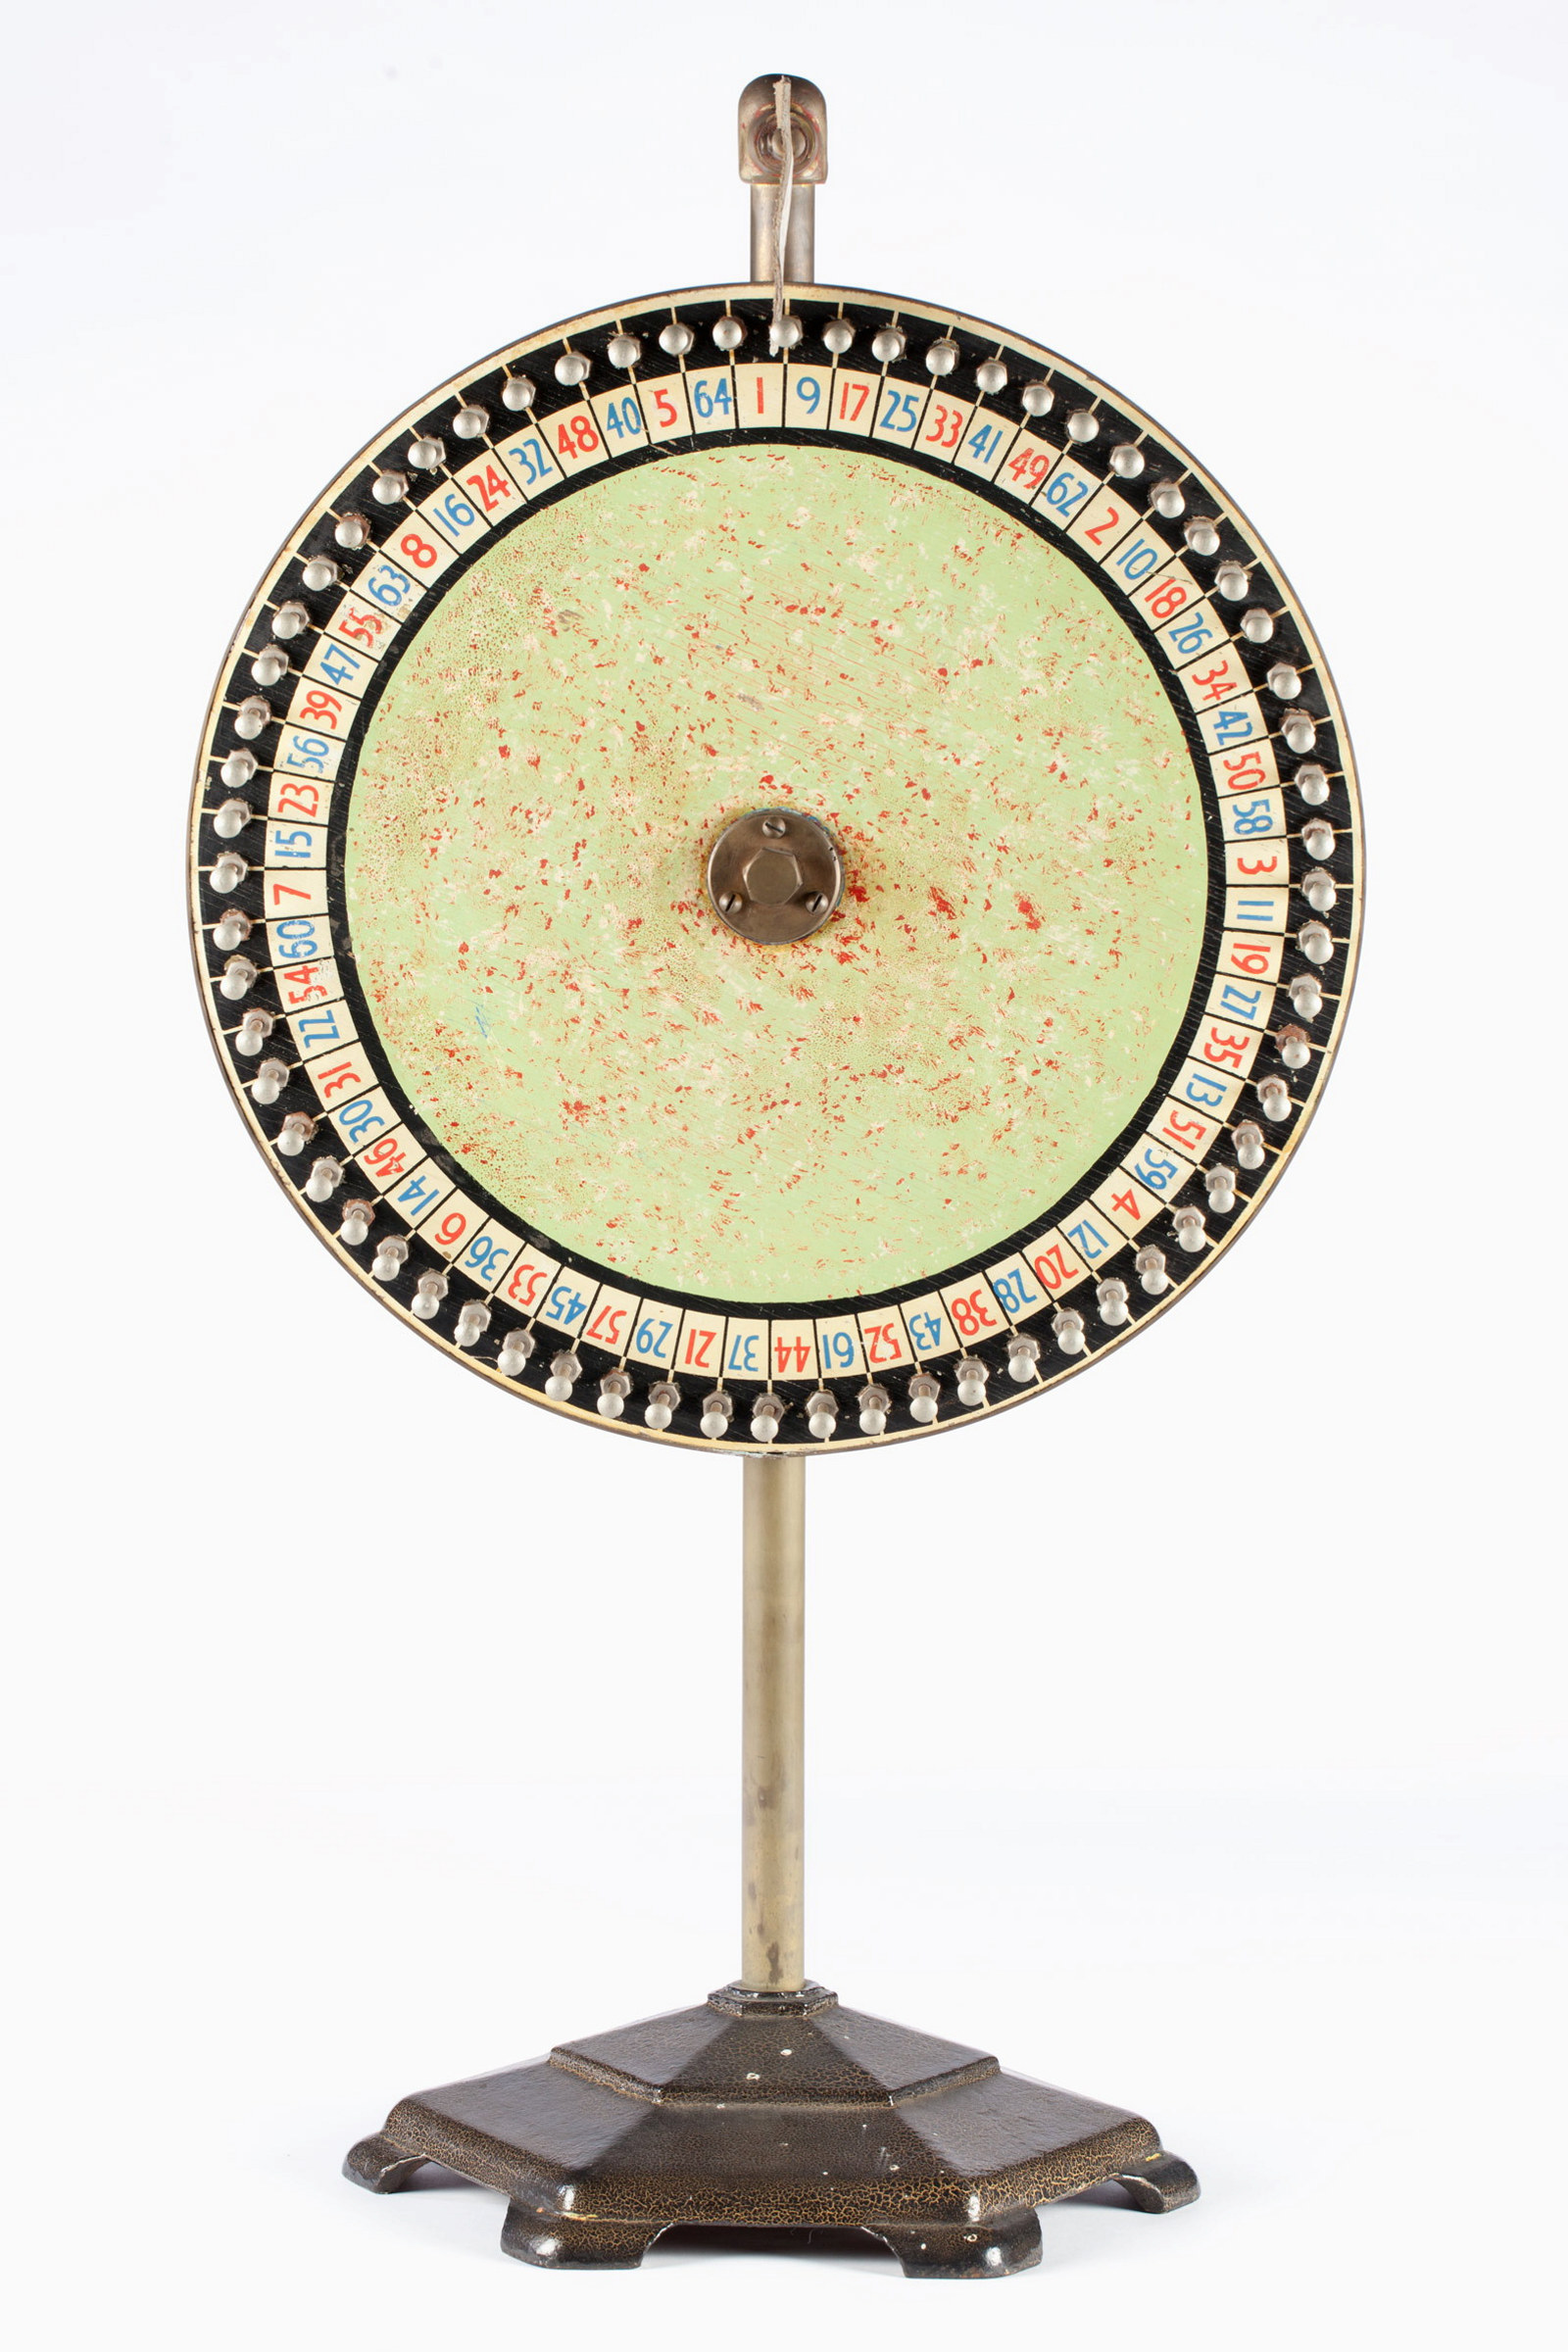 Circular wheel, or Chocolate wheel, on a cast metal stand, mid 20th century